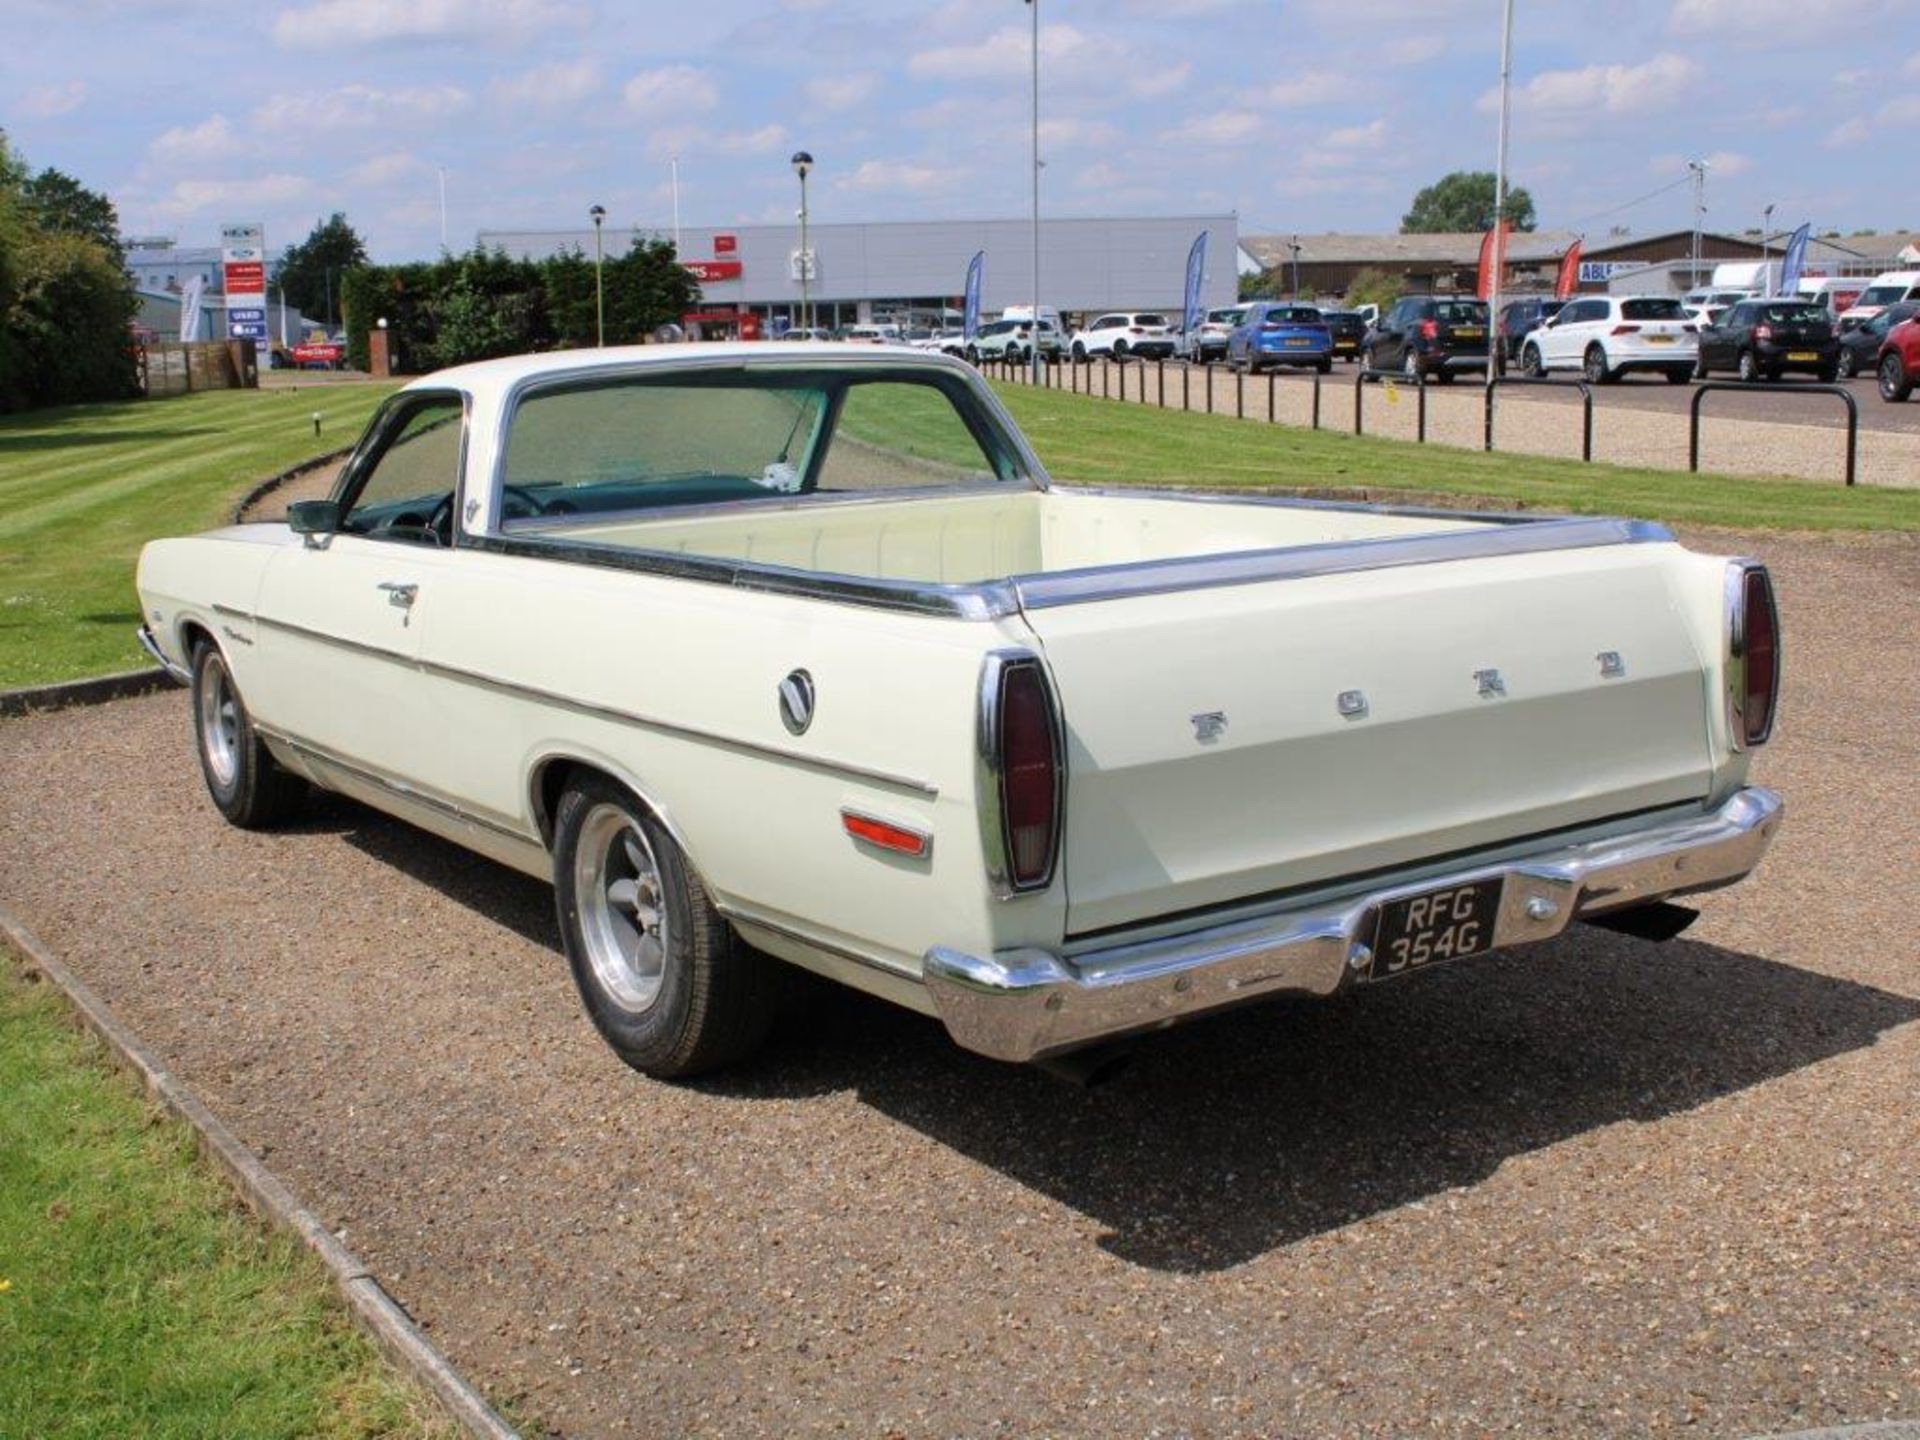 1969 Ford Ranchero 5.8 V8 Auto LHD - Image 6 of 25